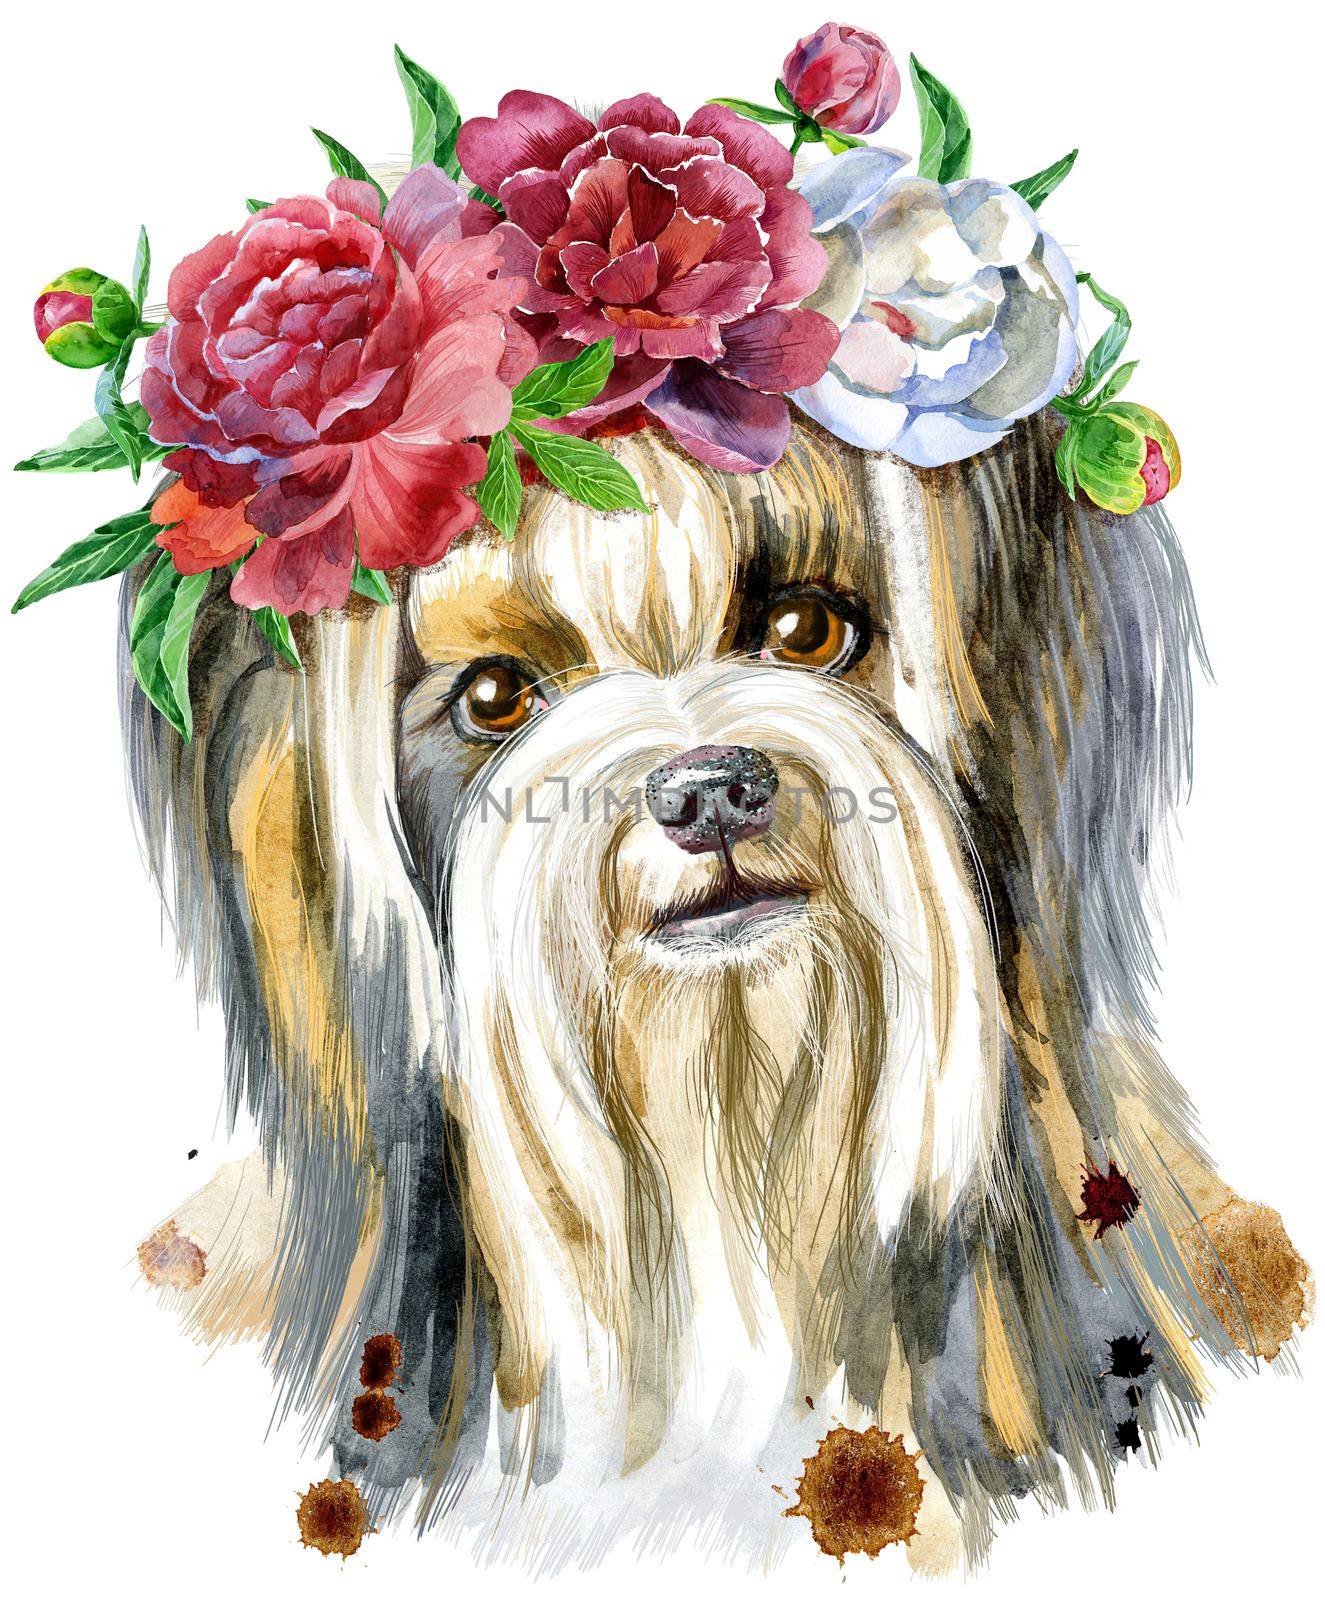 Dog, yorkie with wreath of peonies on white background. Hand drawn sweet pet illustration.